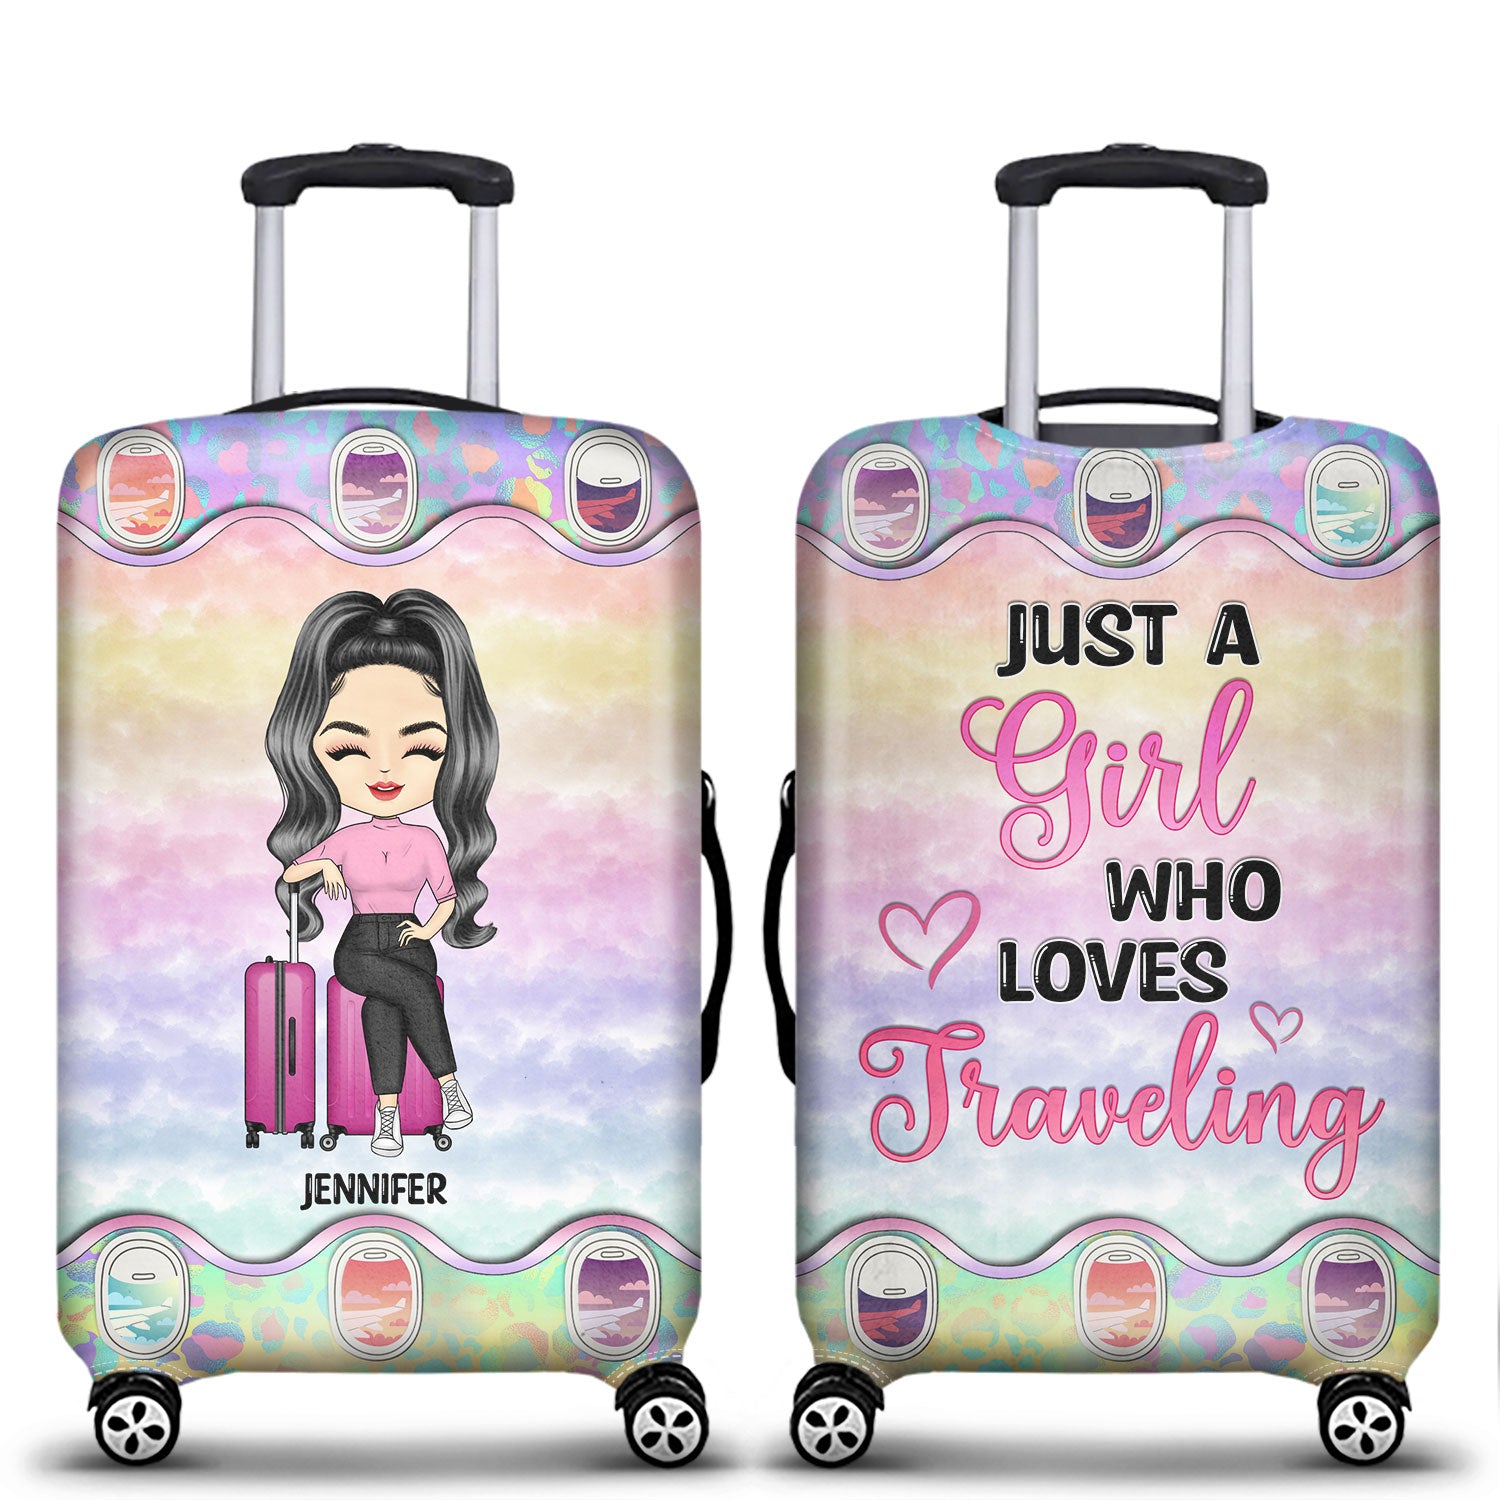 Just A Girl Who Loves Traveling - Birthday Gift For Her, Yourself, Traveler, Wife, Girlfriend, Lover, Daughter, Sister, BFF Best Friend - Personalized Custom Luggage Cover